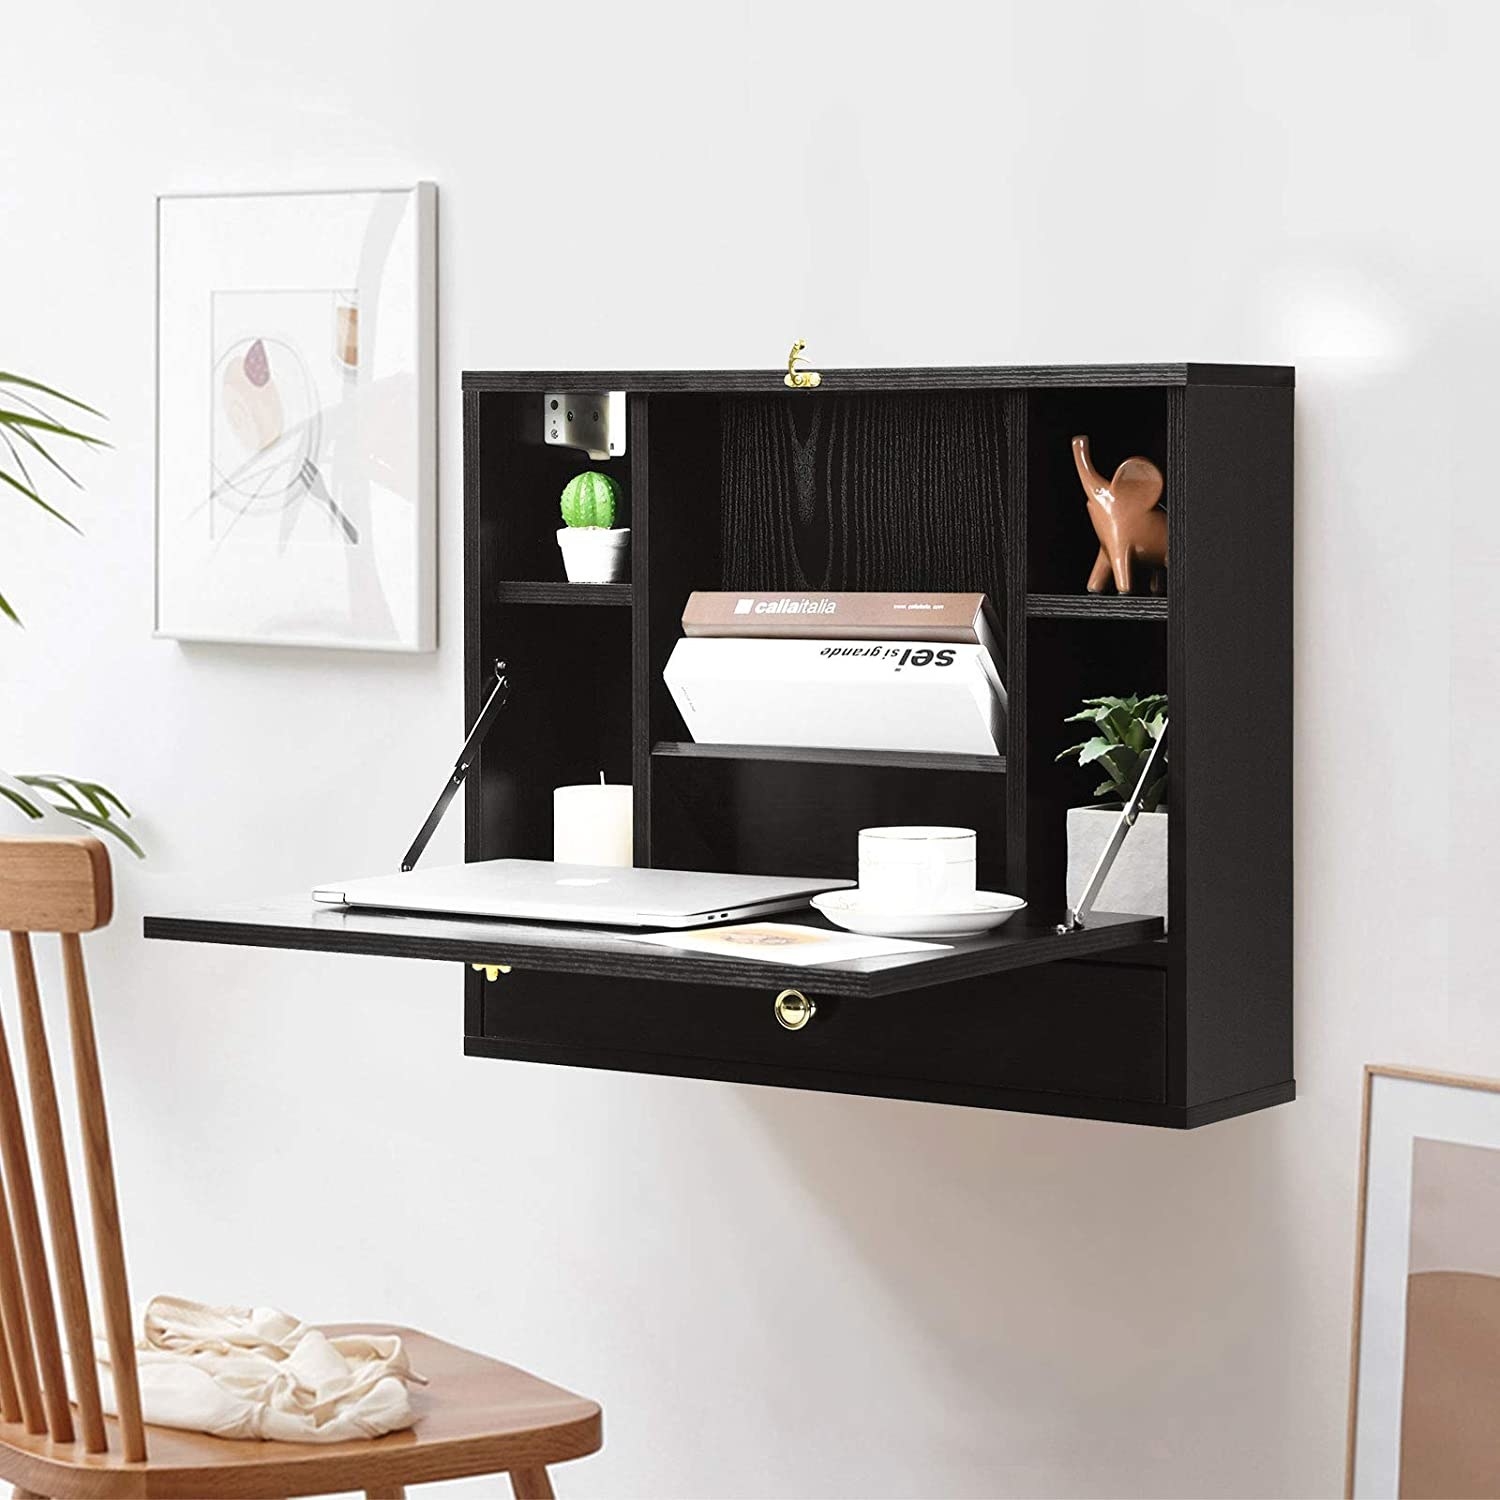 Square shelf system on wall with six spaces for storage and a pull down desktop 